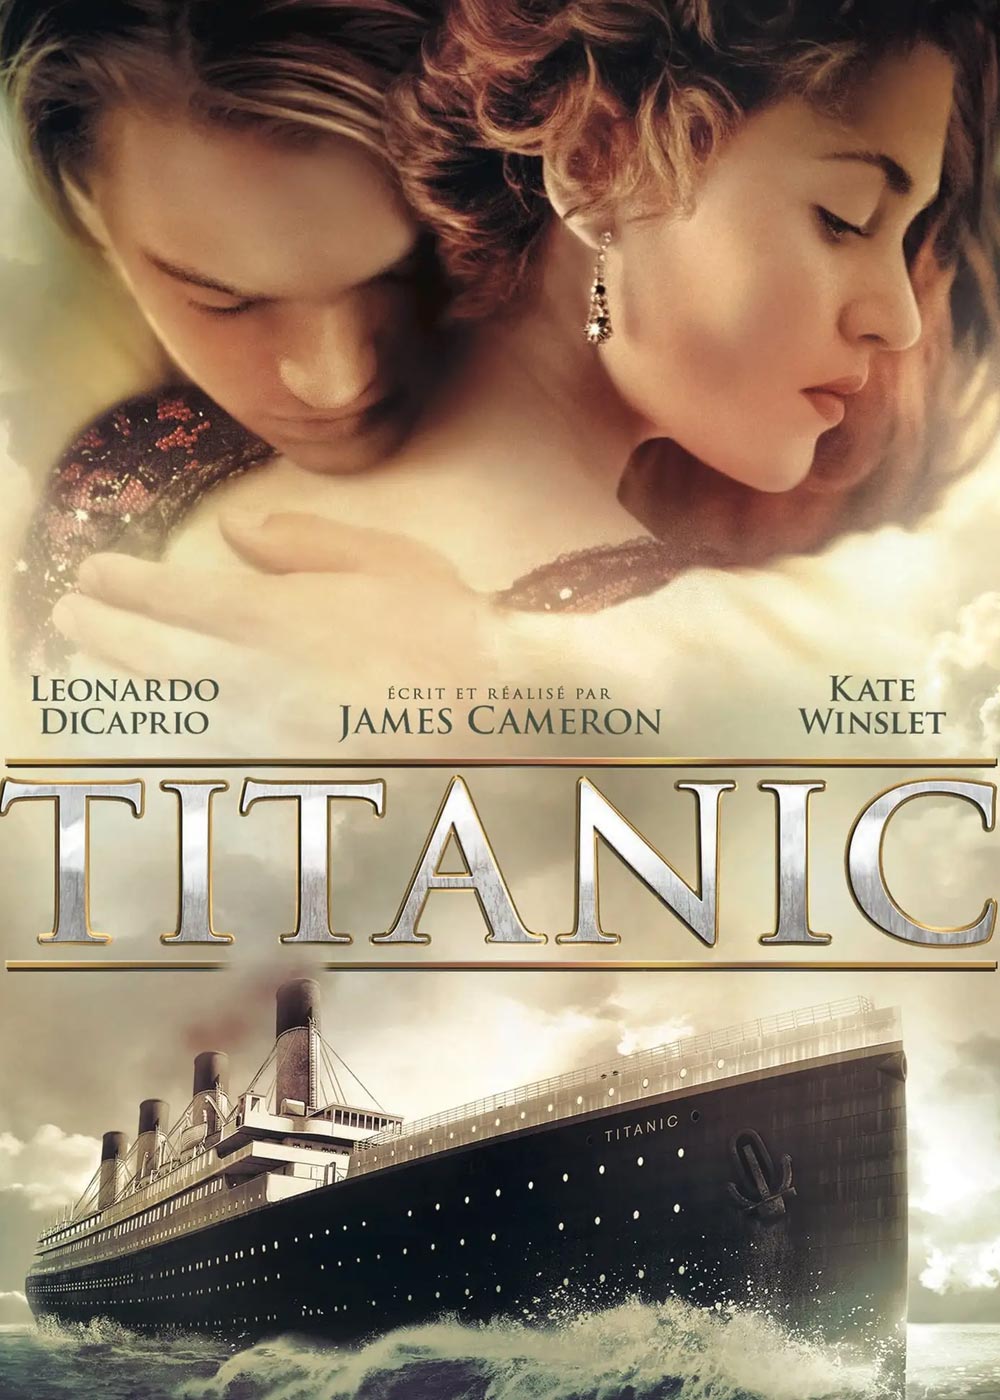 Titanic Movie (1997) | Release Date, Review, Cast, Trailer, Watch Online at  Disney+ Hotstar, Google Play Movies, YouTube - Gadgets 360